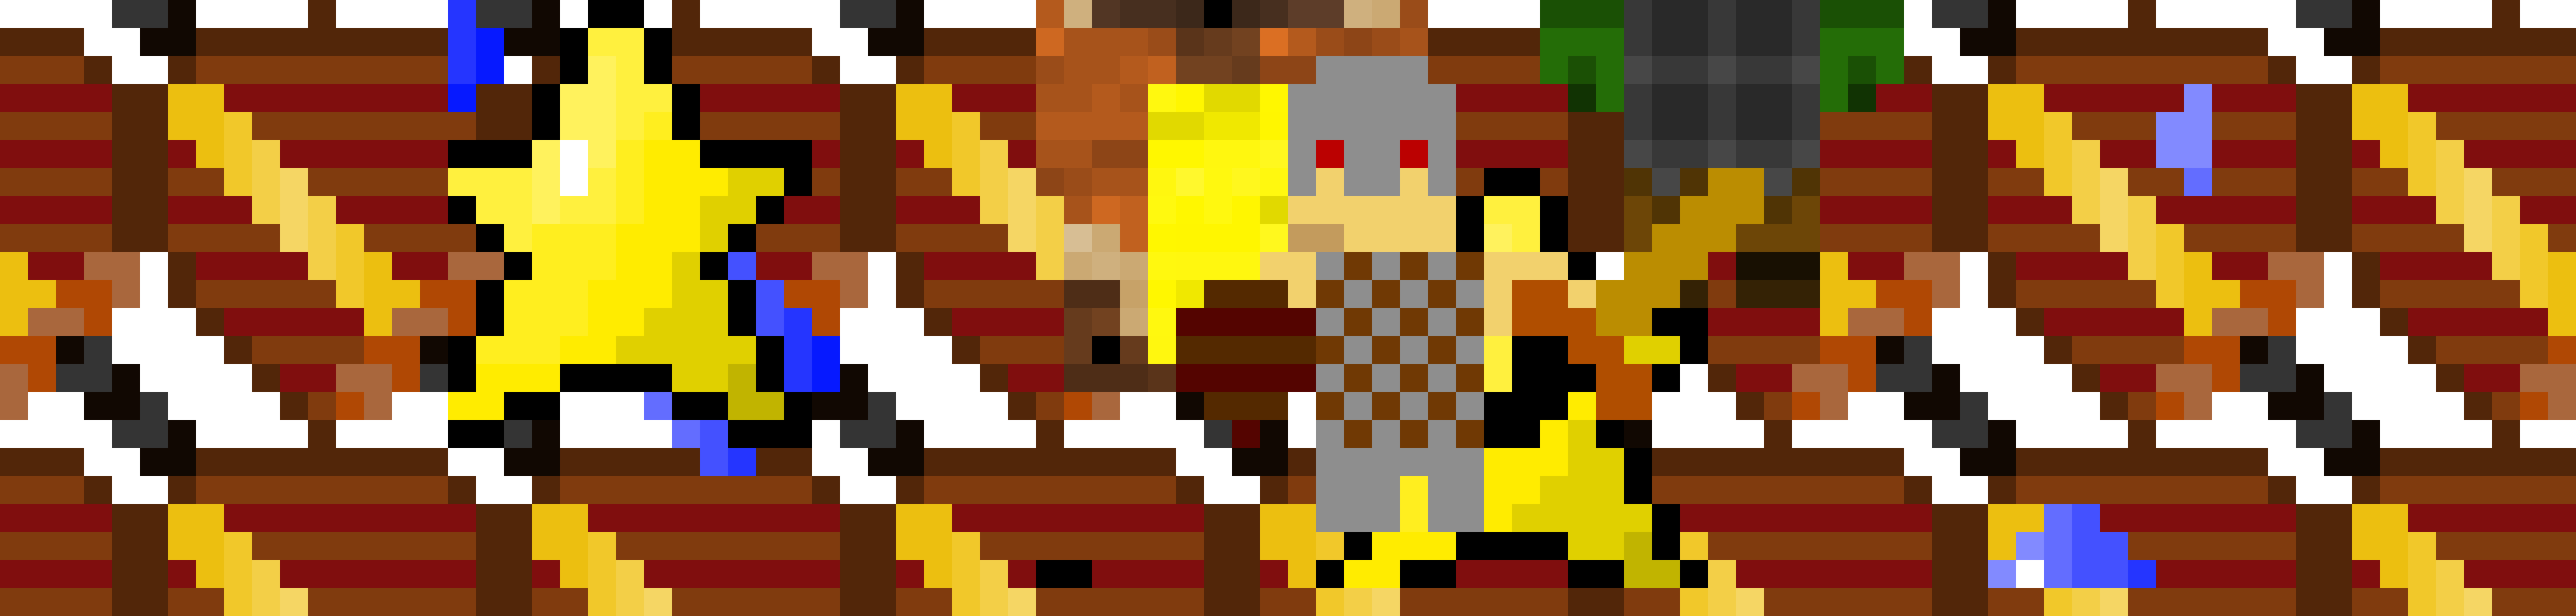 KNIGHT QUEST